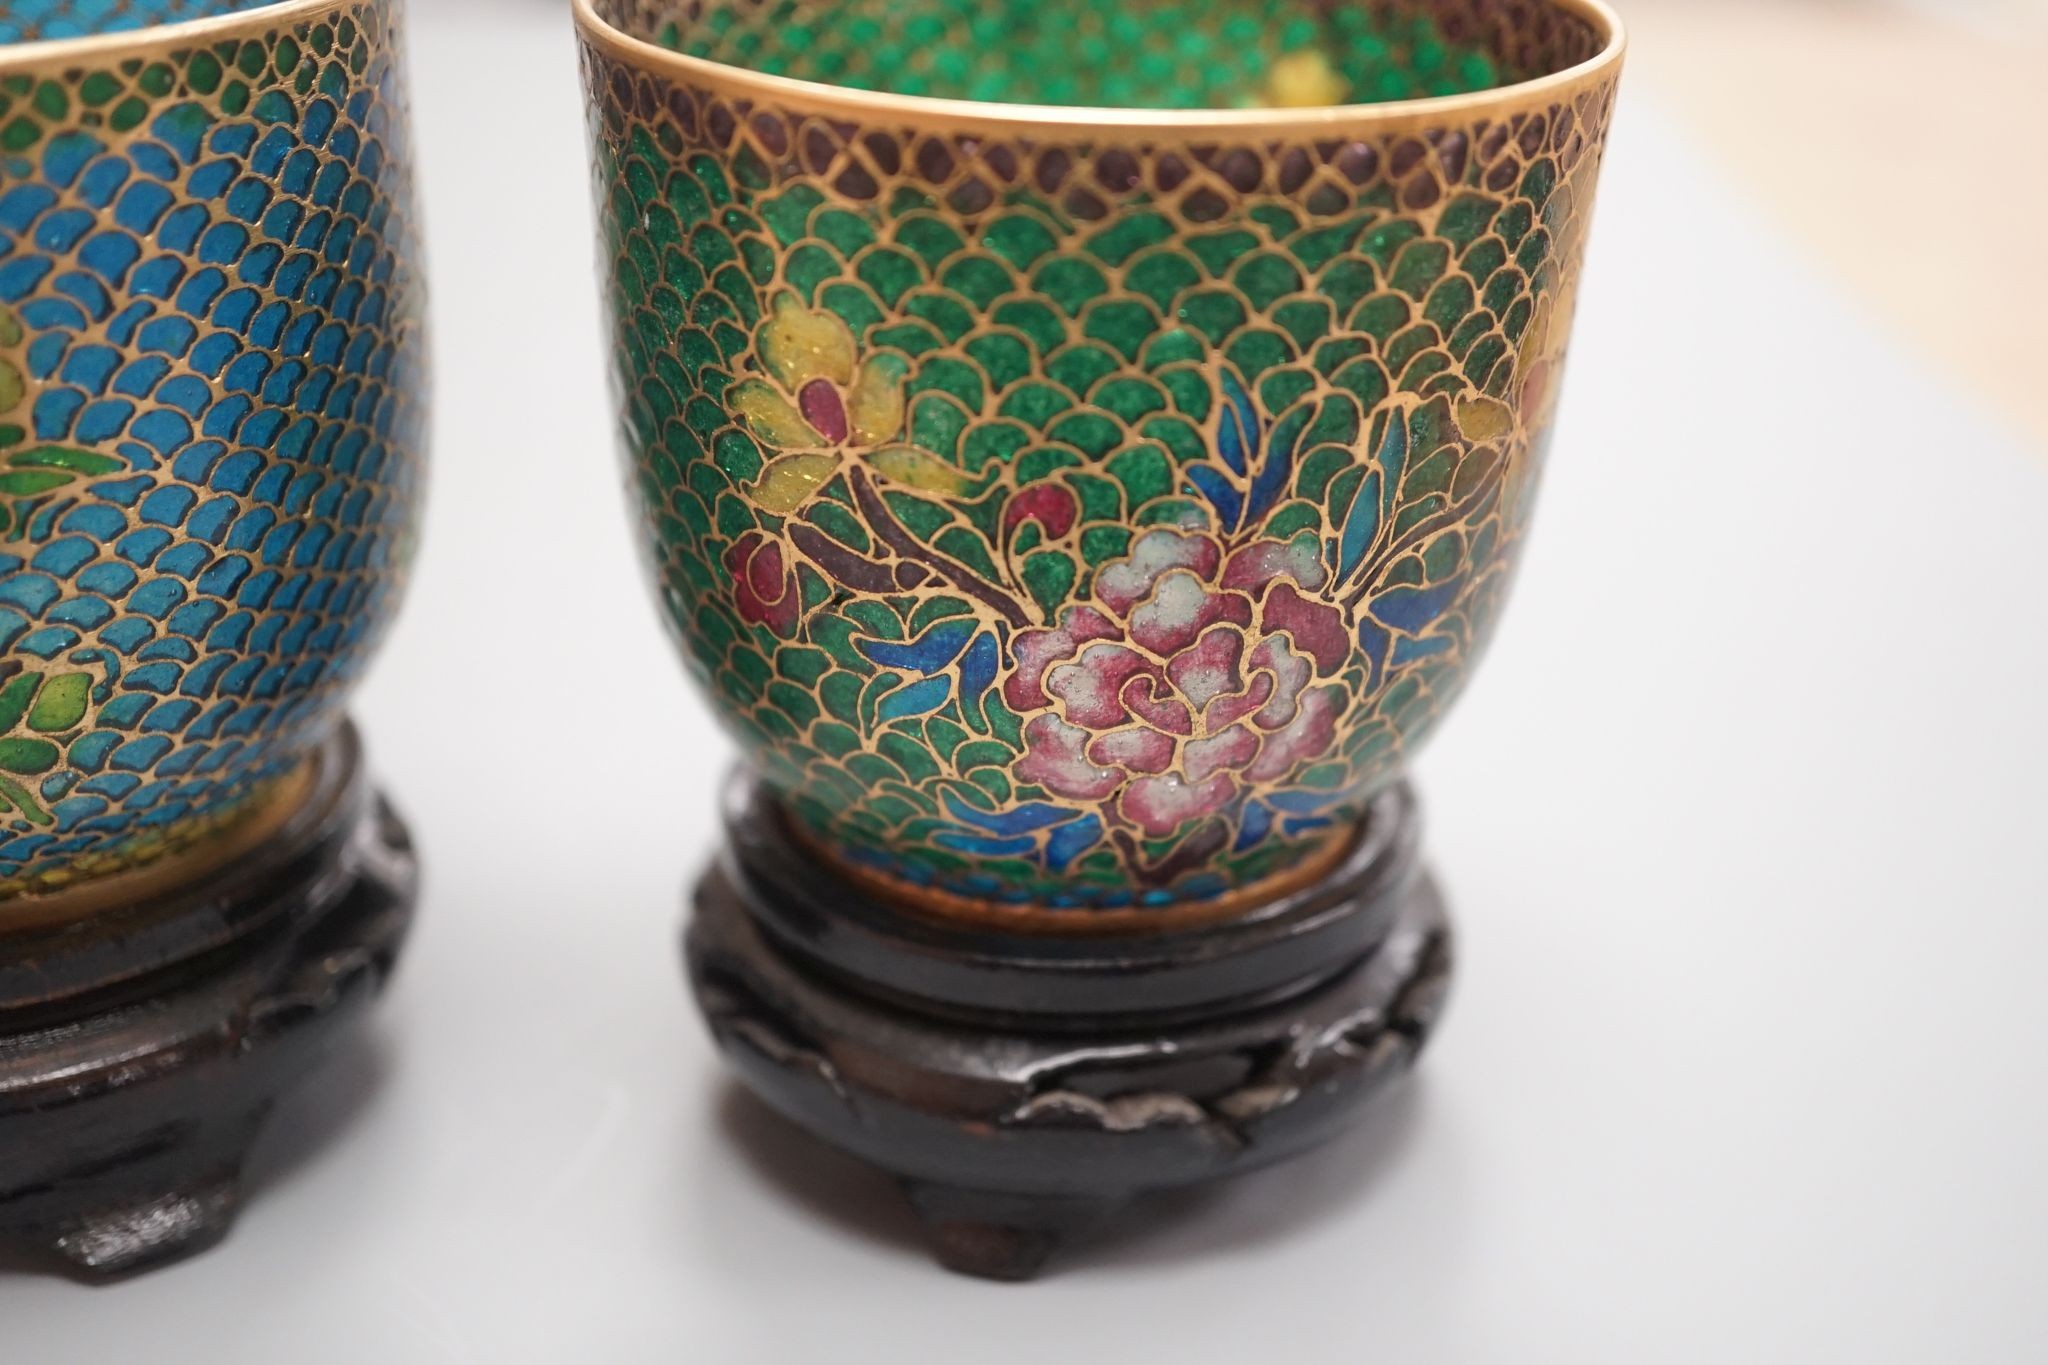 A pair of Chinese plique-a-jour cups (cased)